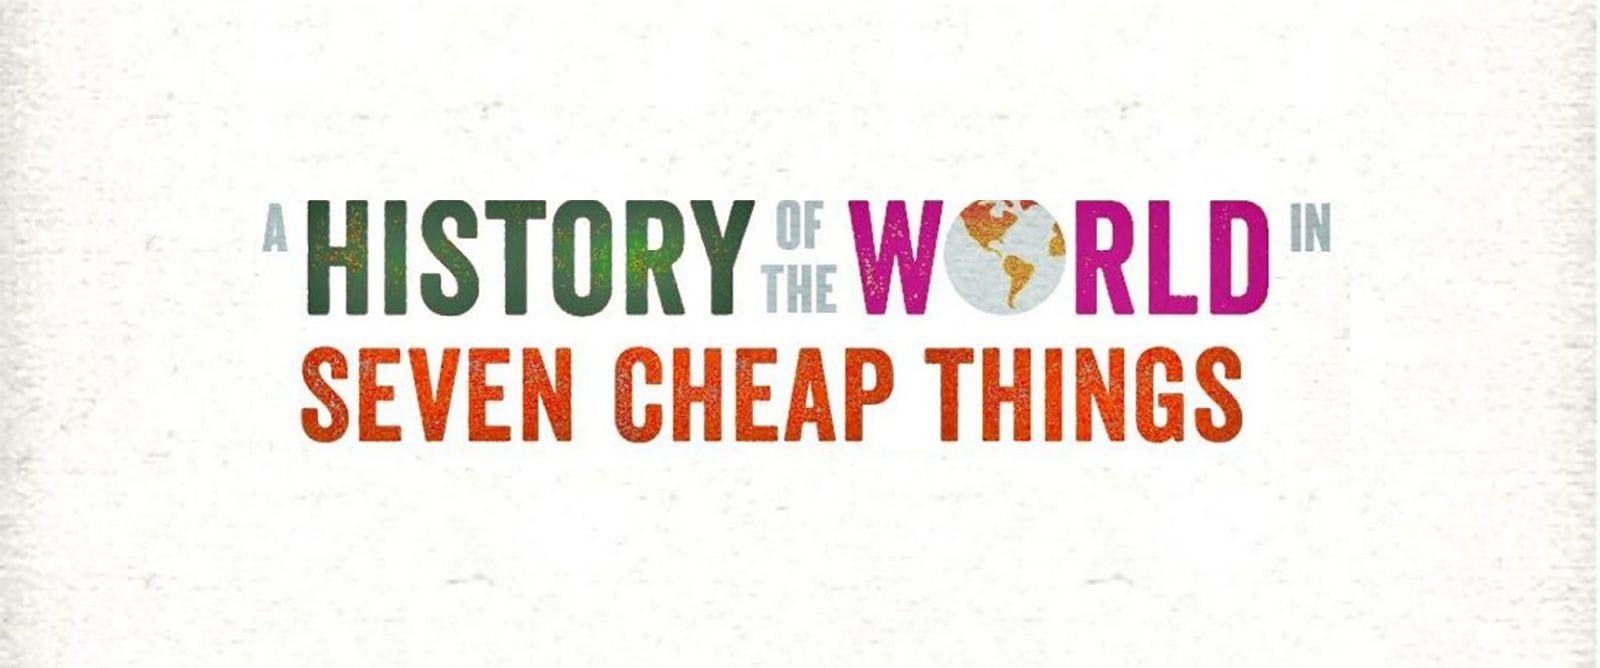 Book Cover - A History of the World in Seven Cheap Things